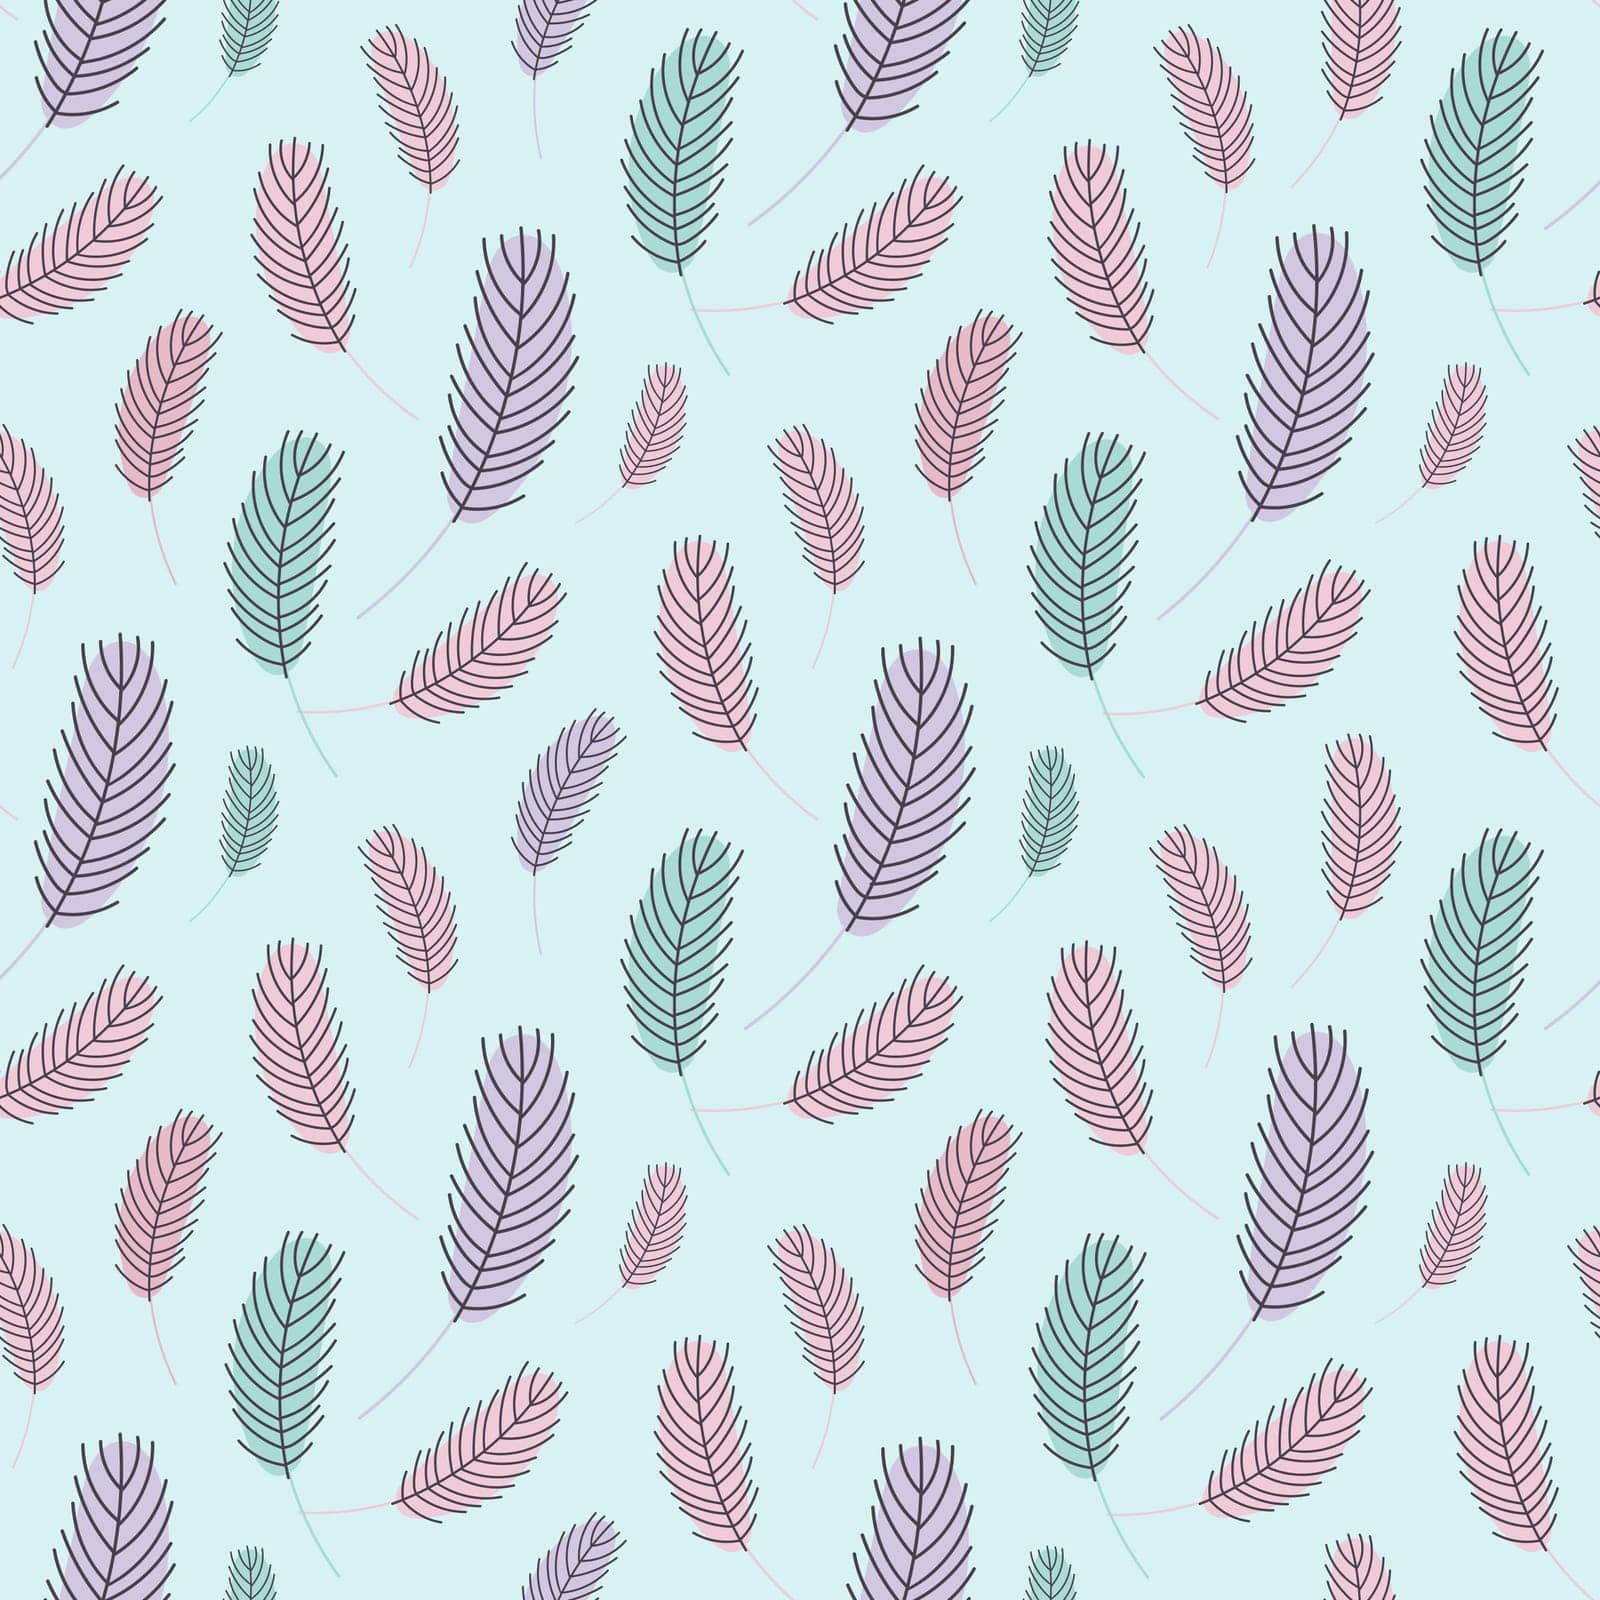 feathers seamless pattern. pattern with feathers by Dustick